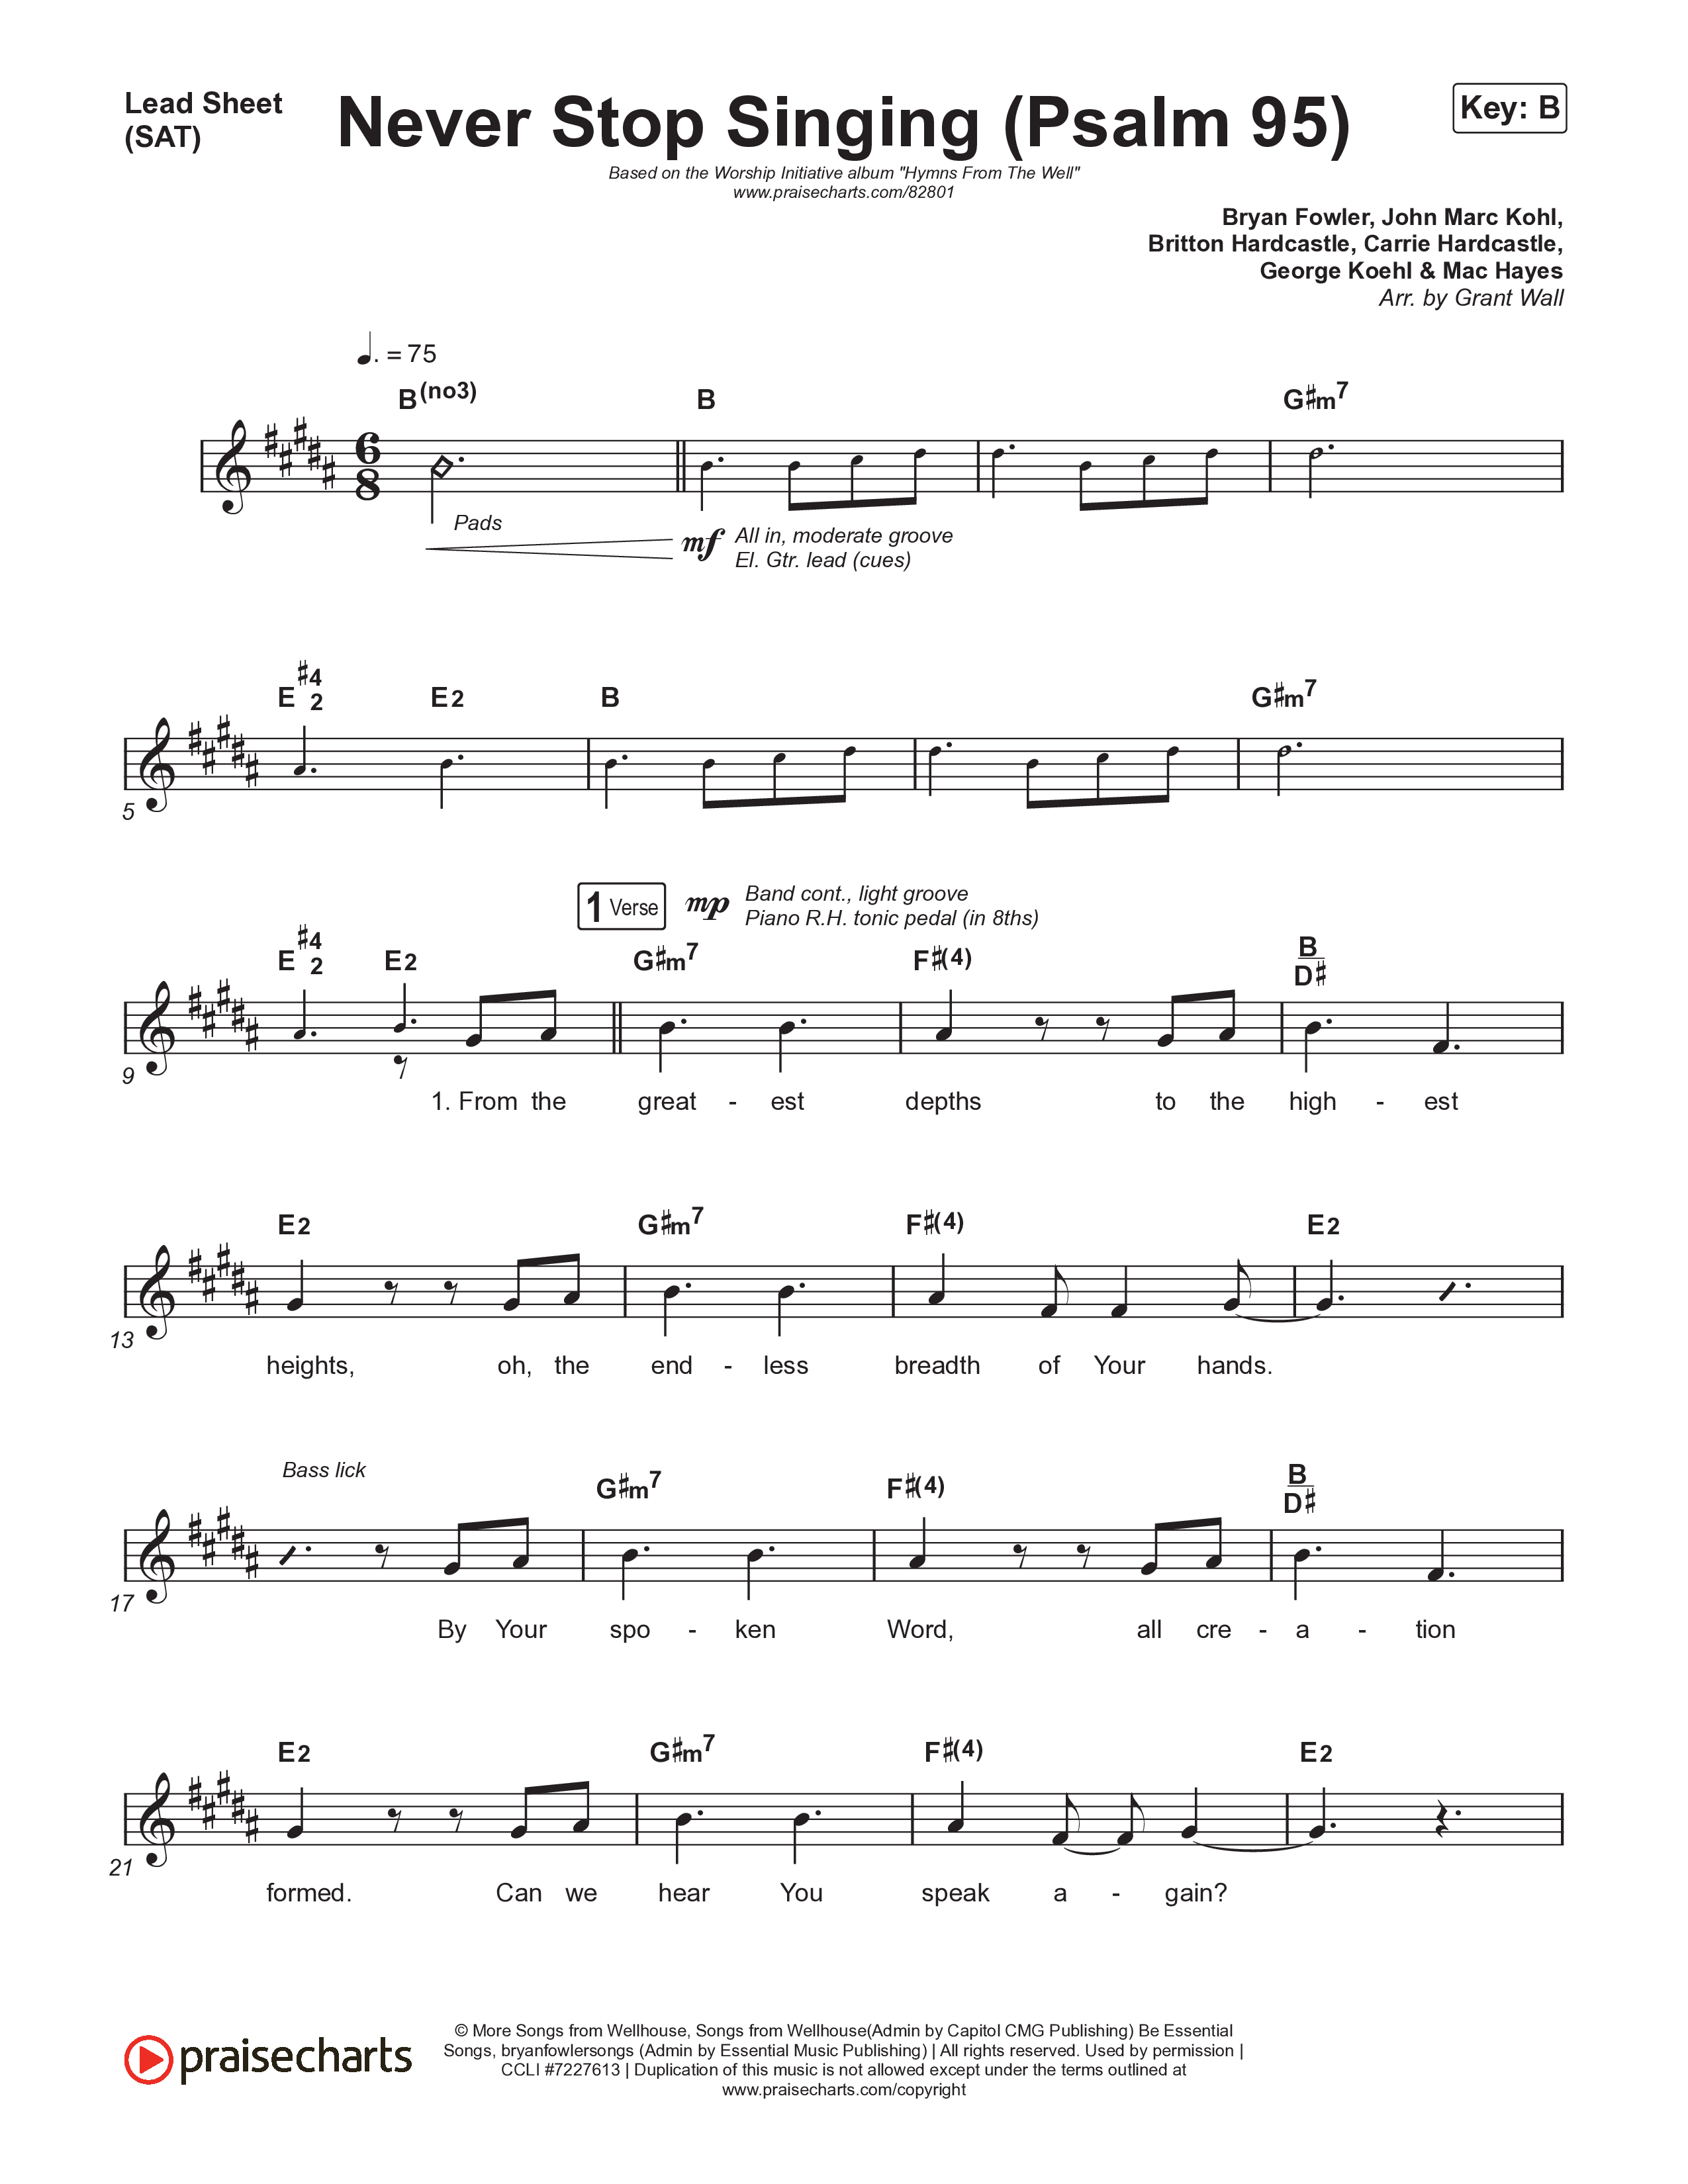 Never Stop Singing (Psalm 95) Lead Sheet (SAT) (The Worship Initiative / Writers Well)